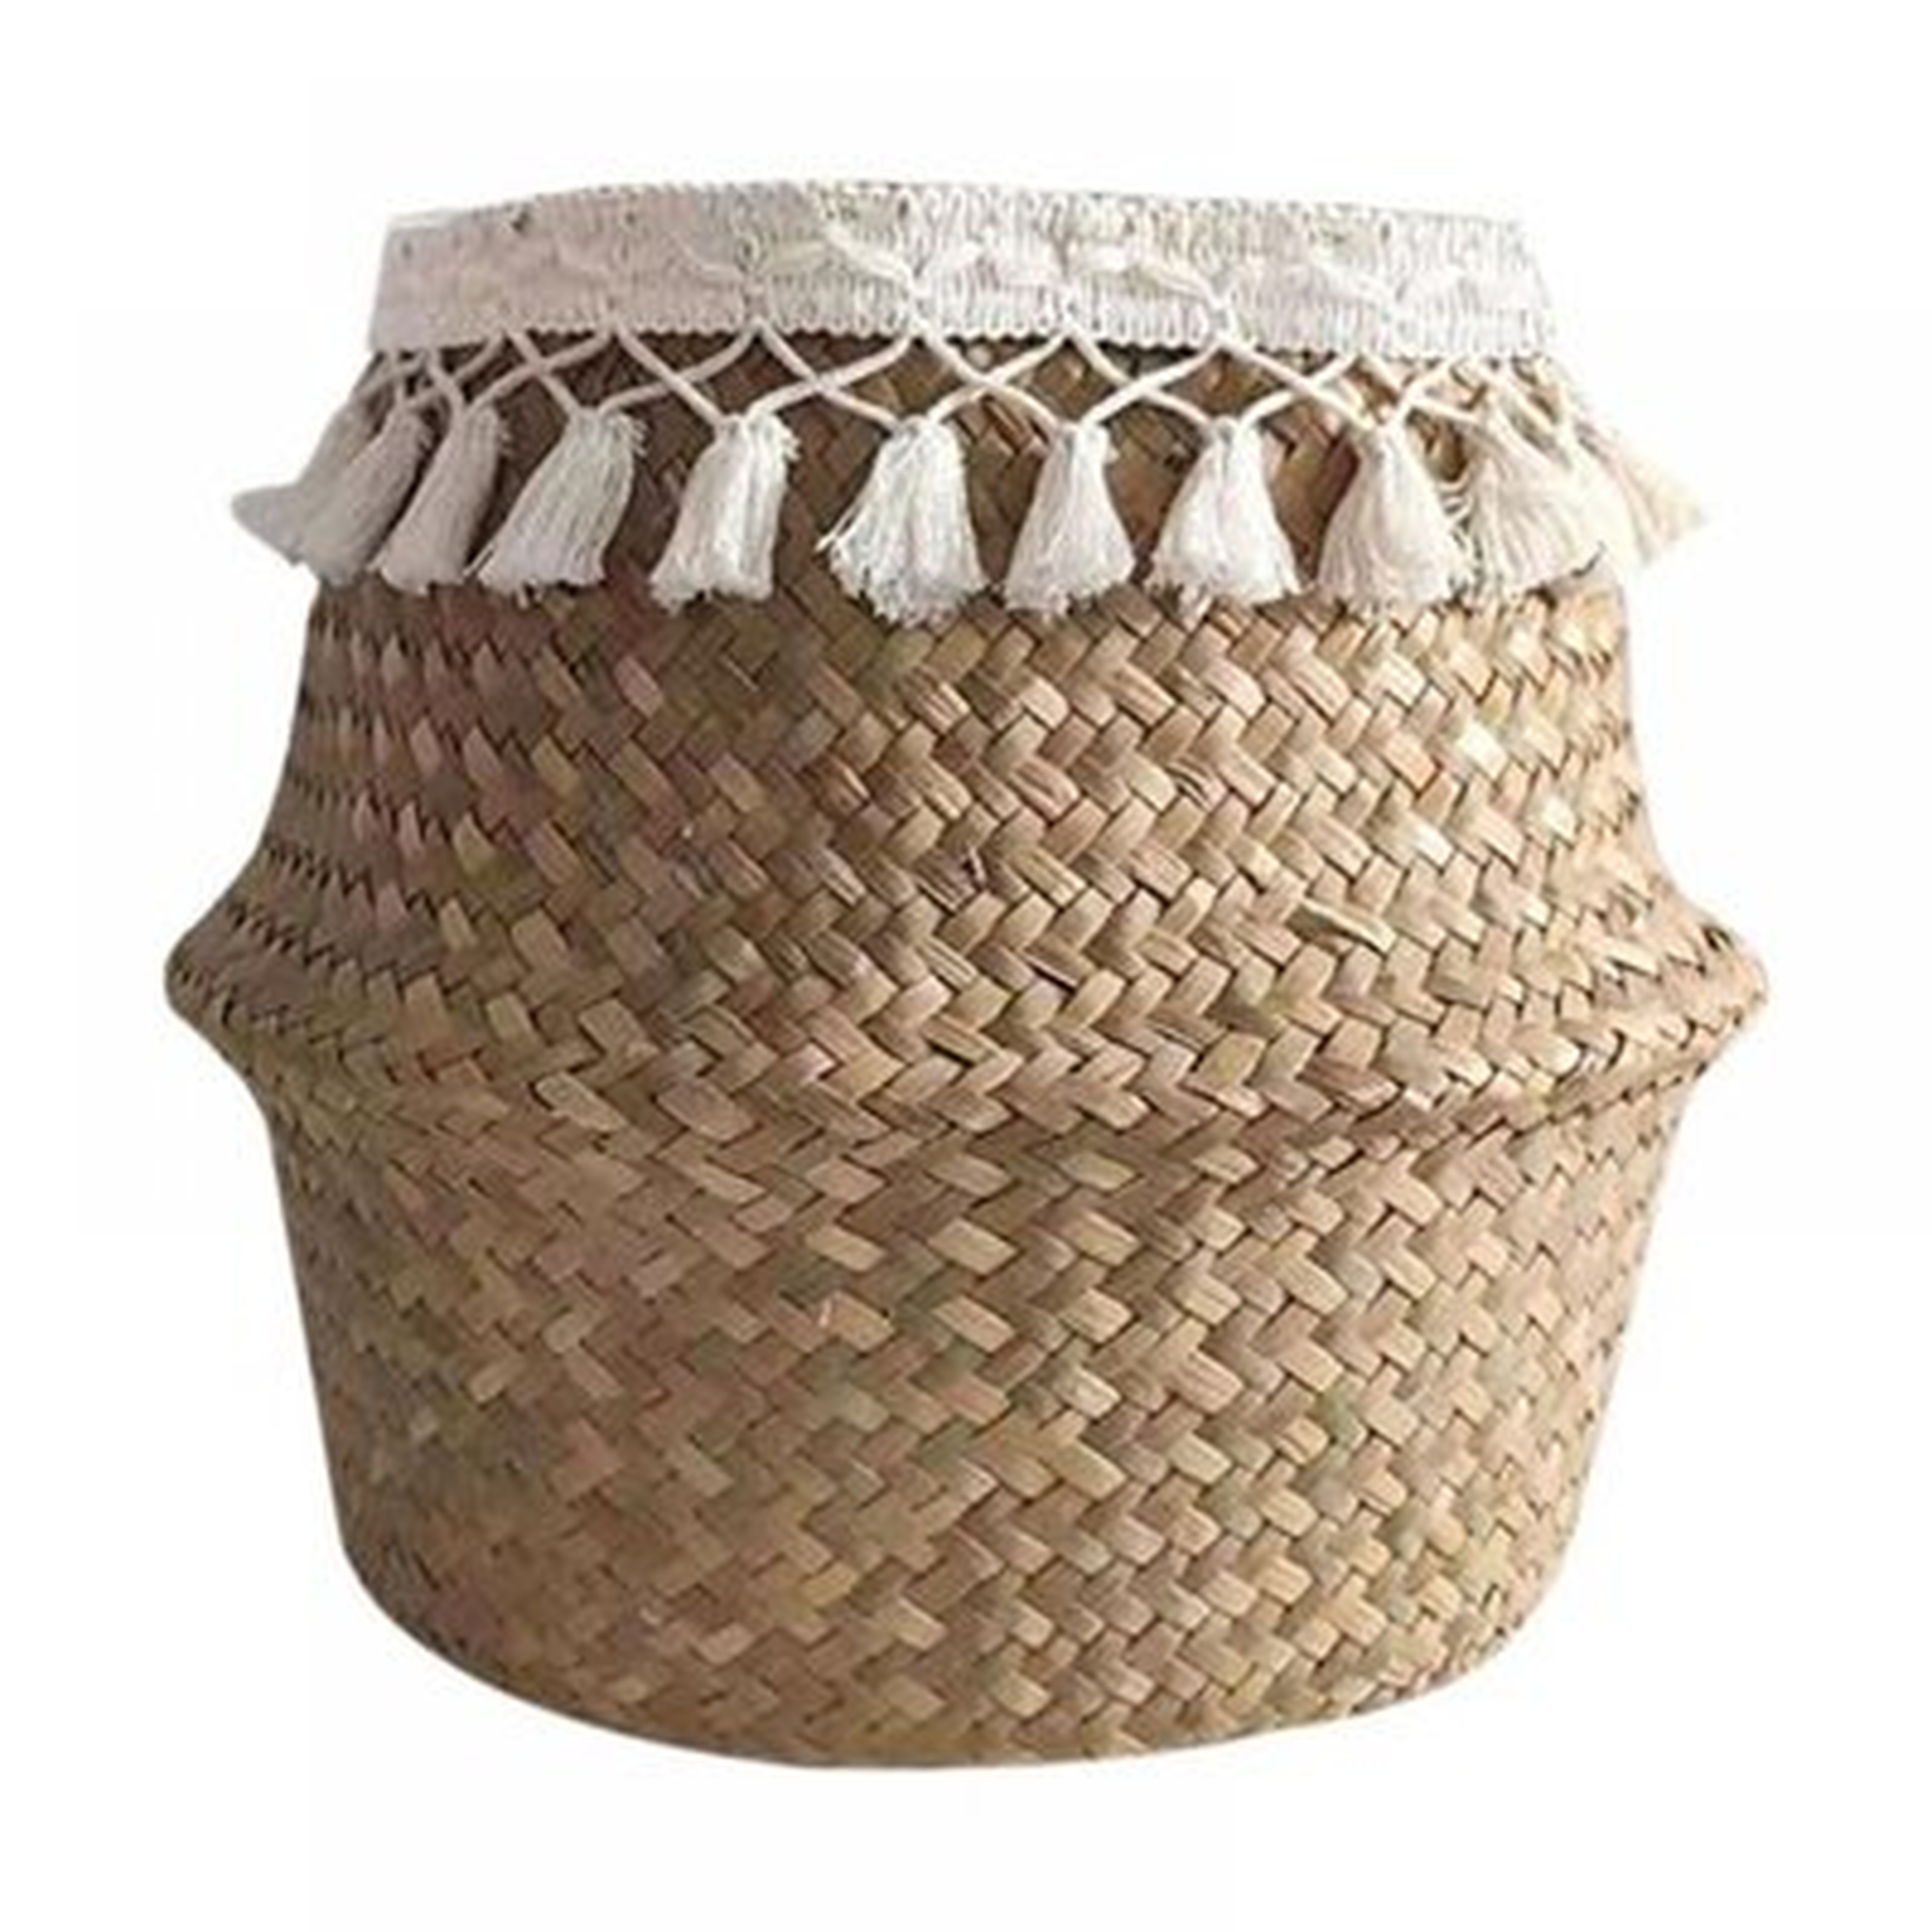 Woven Seagrass Belly Basket,Tassel Macrame Hand Woven Seagrass Belly Basket For Storage,Picnic,Plant Basin Cover,Groceries,Home Decor And Woven Straw Beach Bag - Wayfair